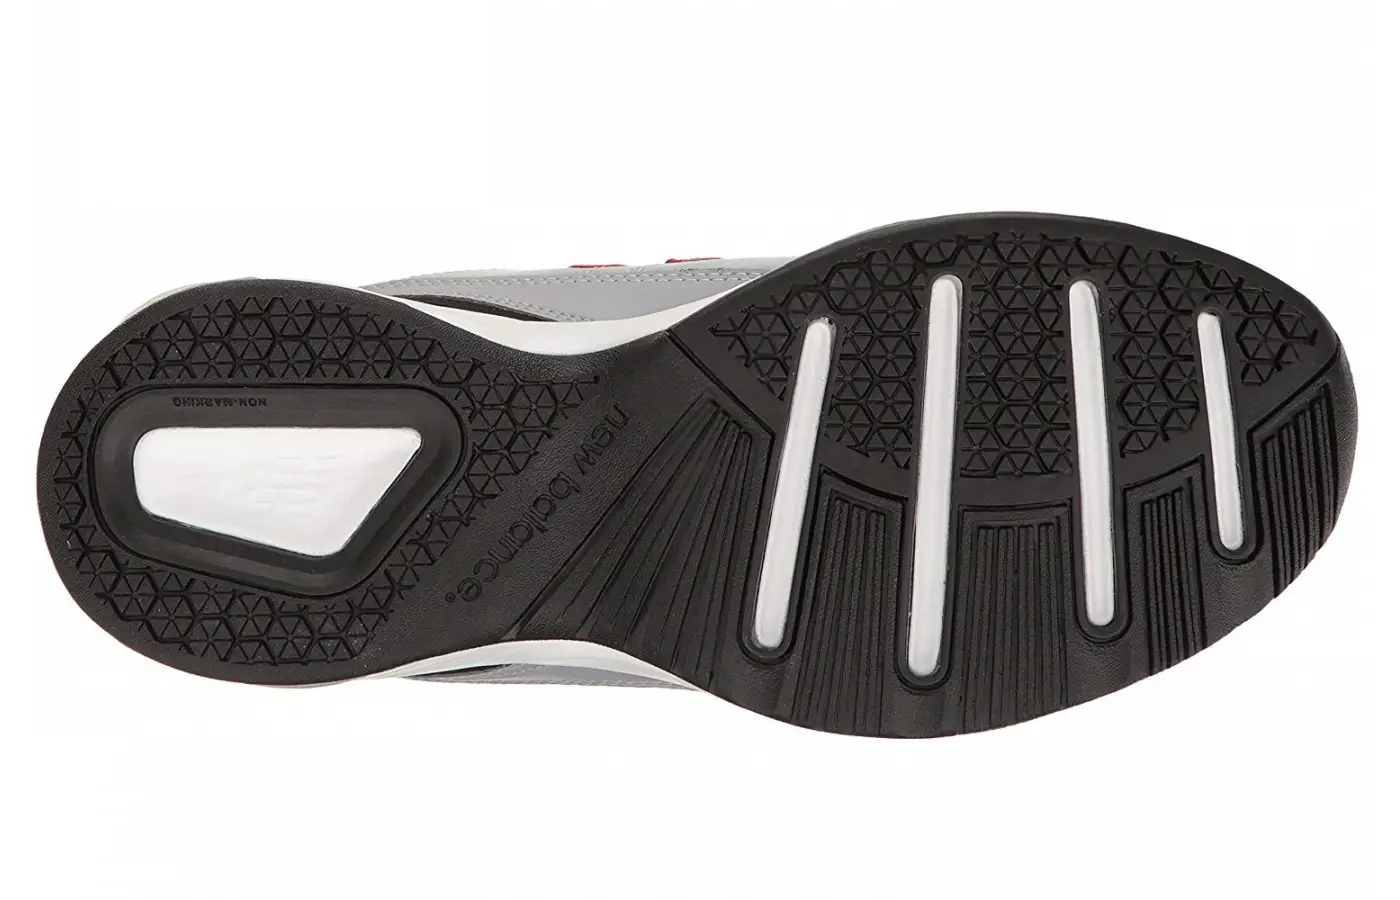 The New Balance 608v4 has a non-marking outsole in order to protect floors being worked out on.